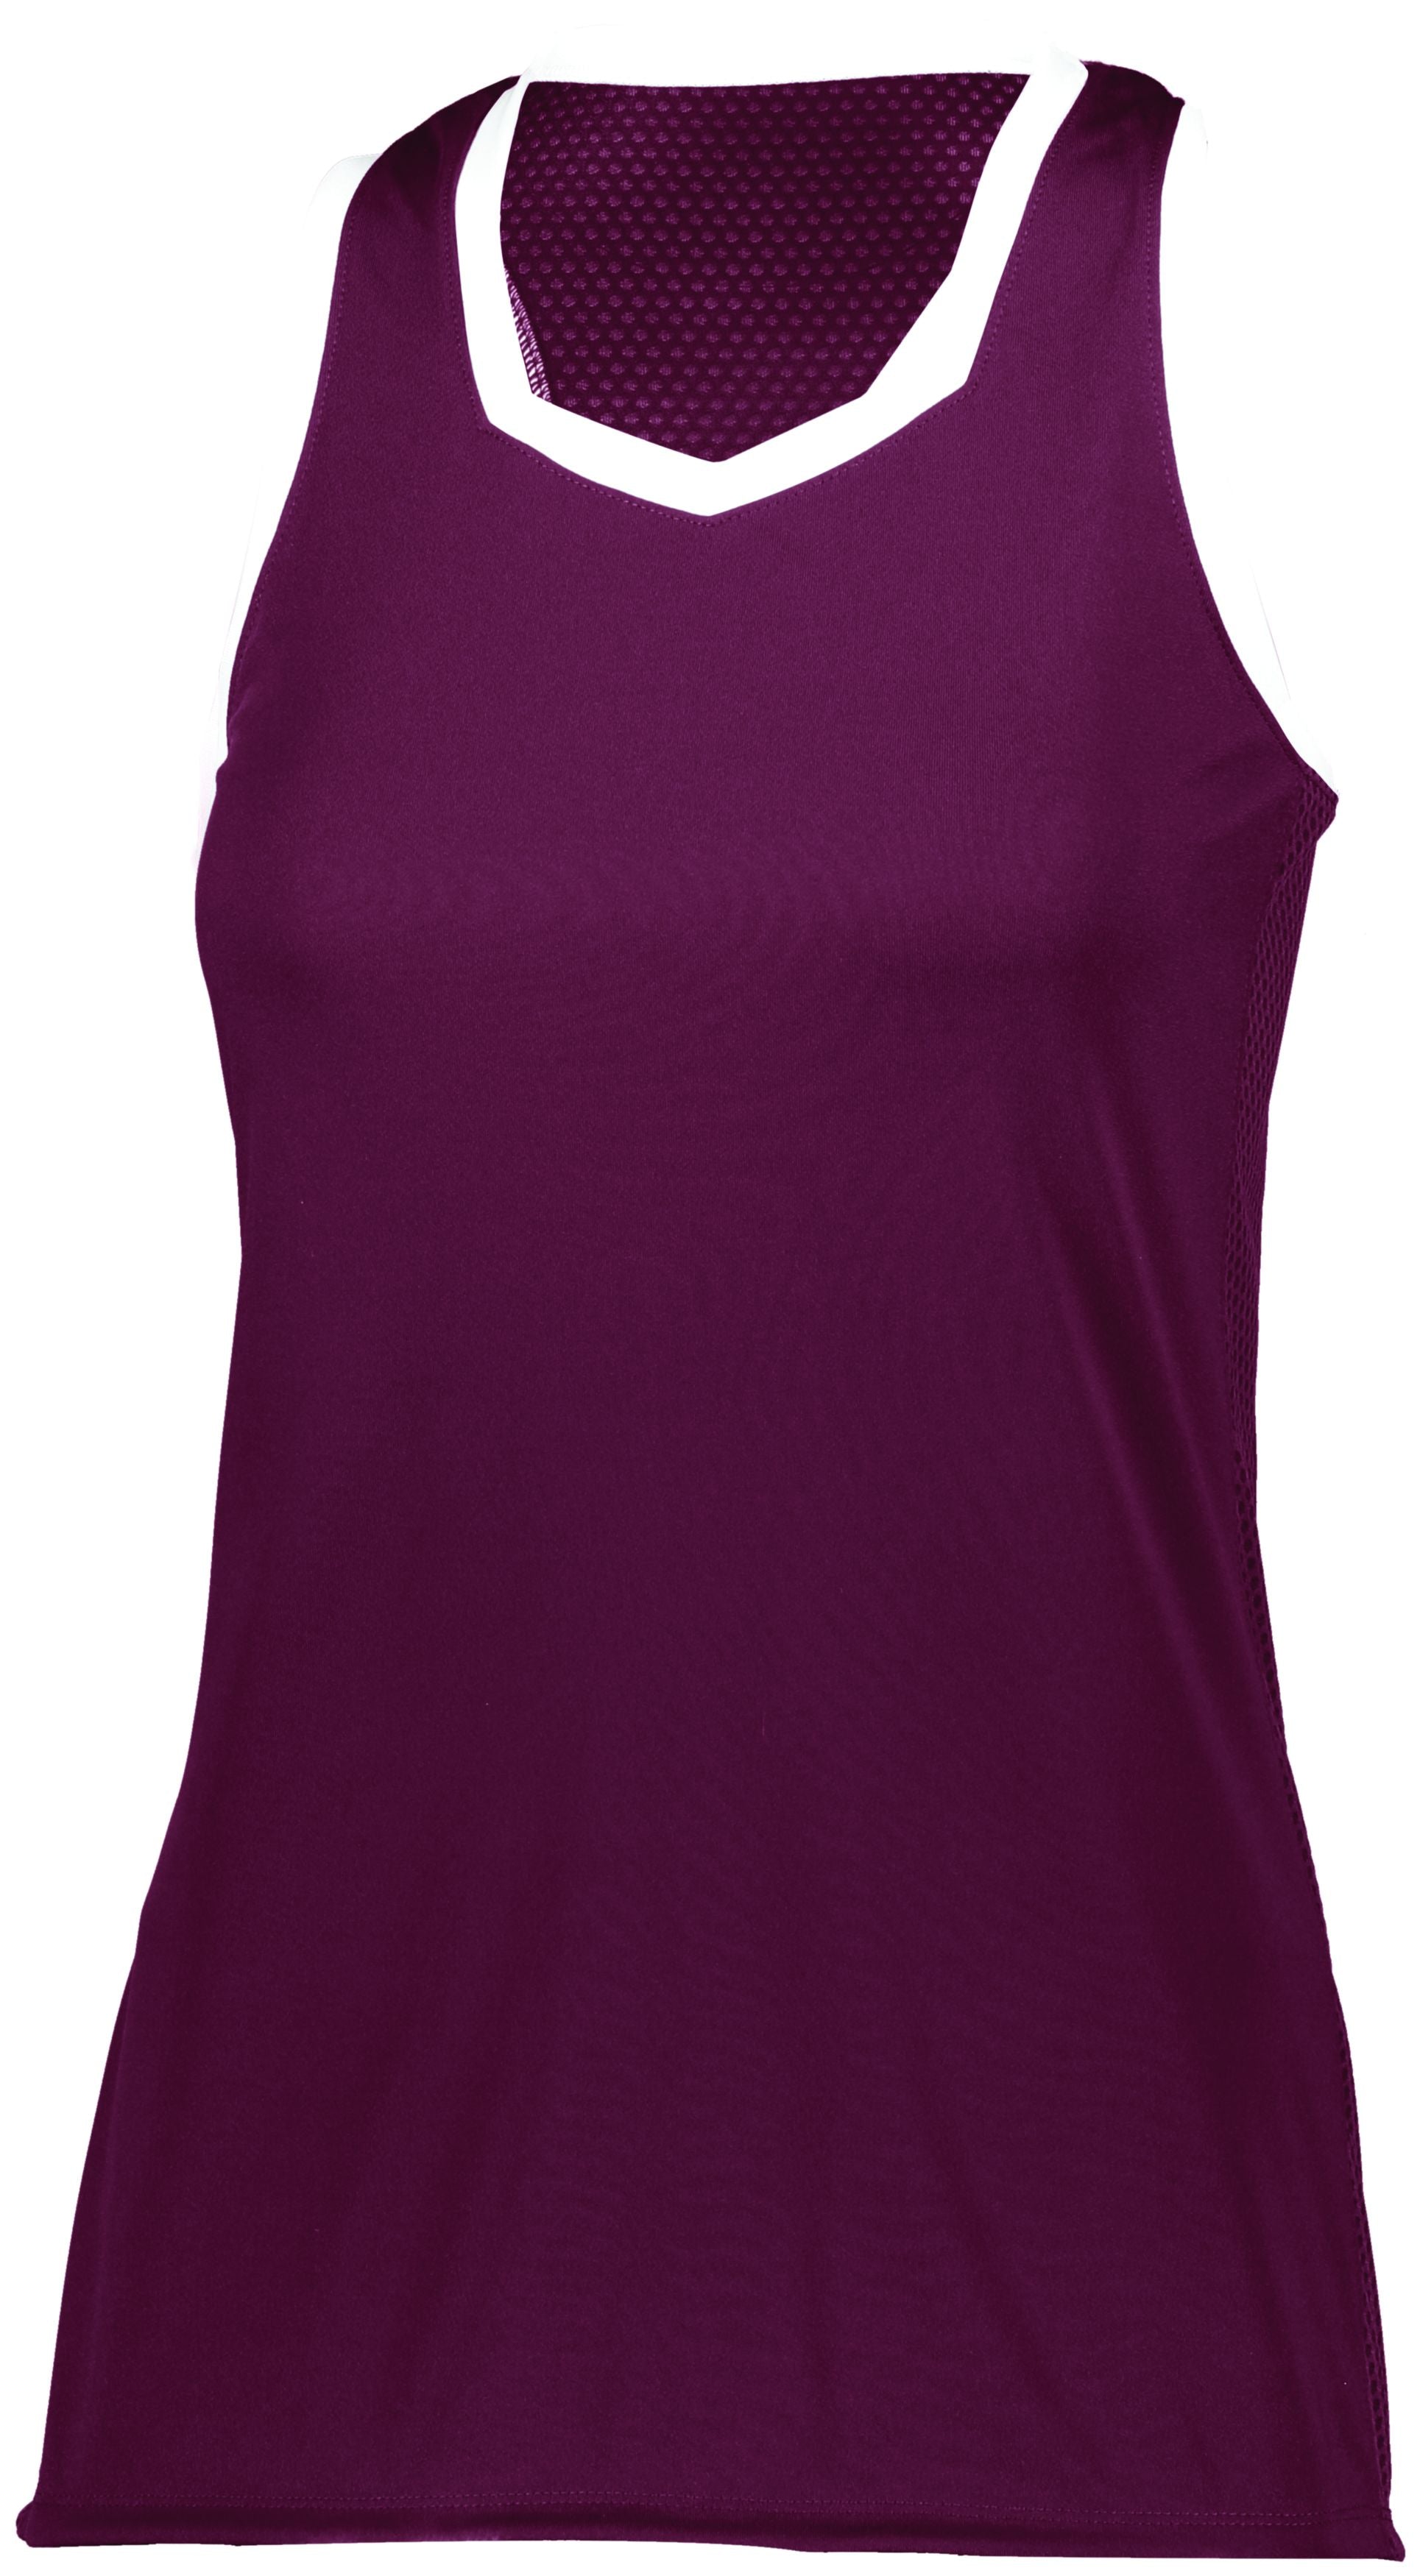 Augusta Sportswear Girls Crosse Jersey in Maroon/White  -Part of the Girls, Augusta-Products, Girls-Jersey, Shirts product lines at KanaleyCreations.com